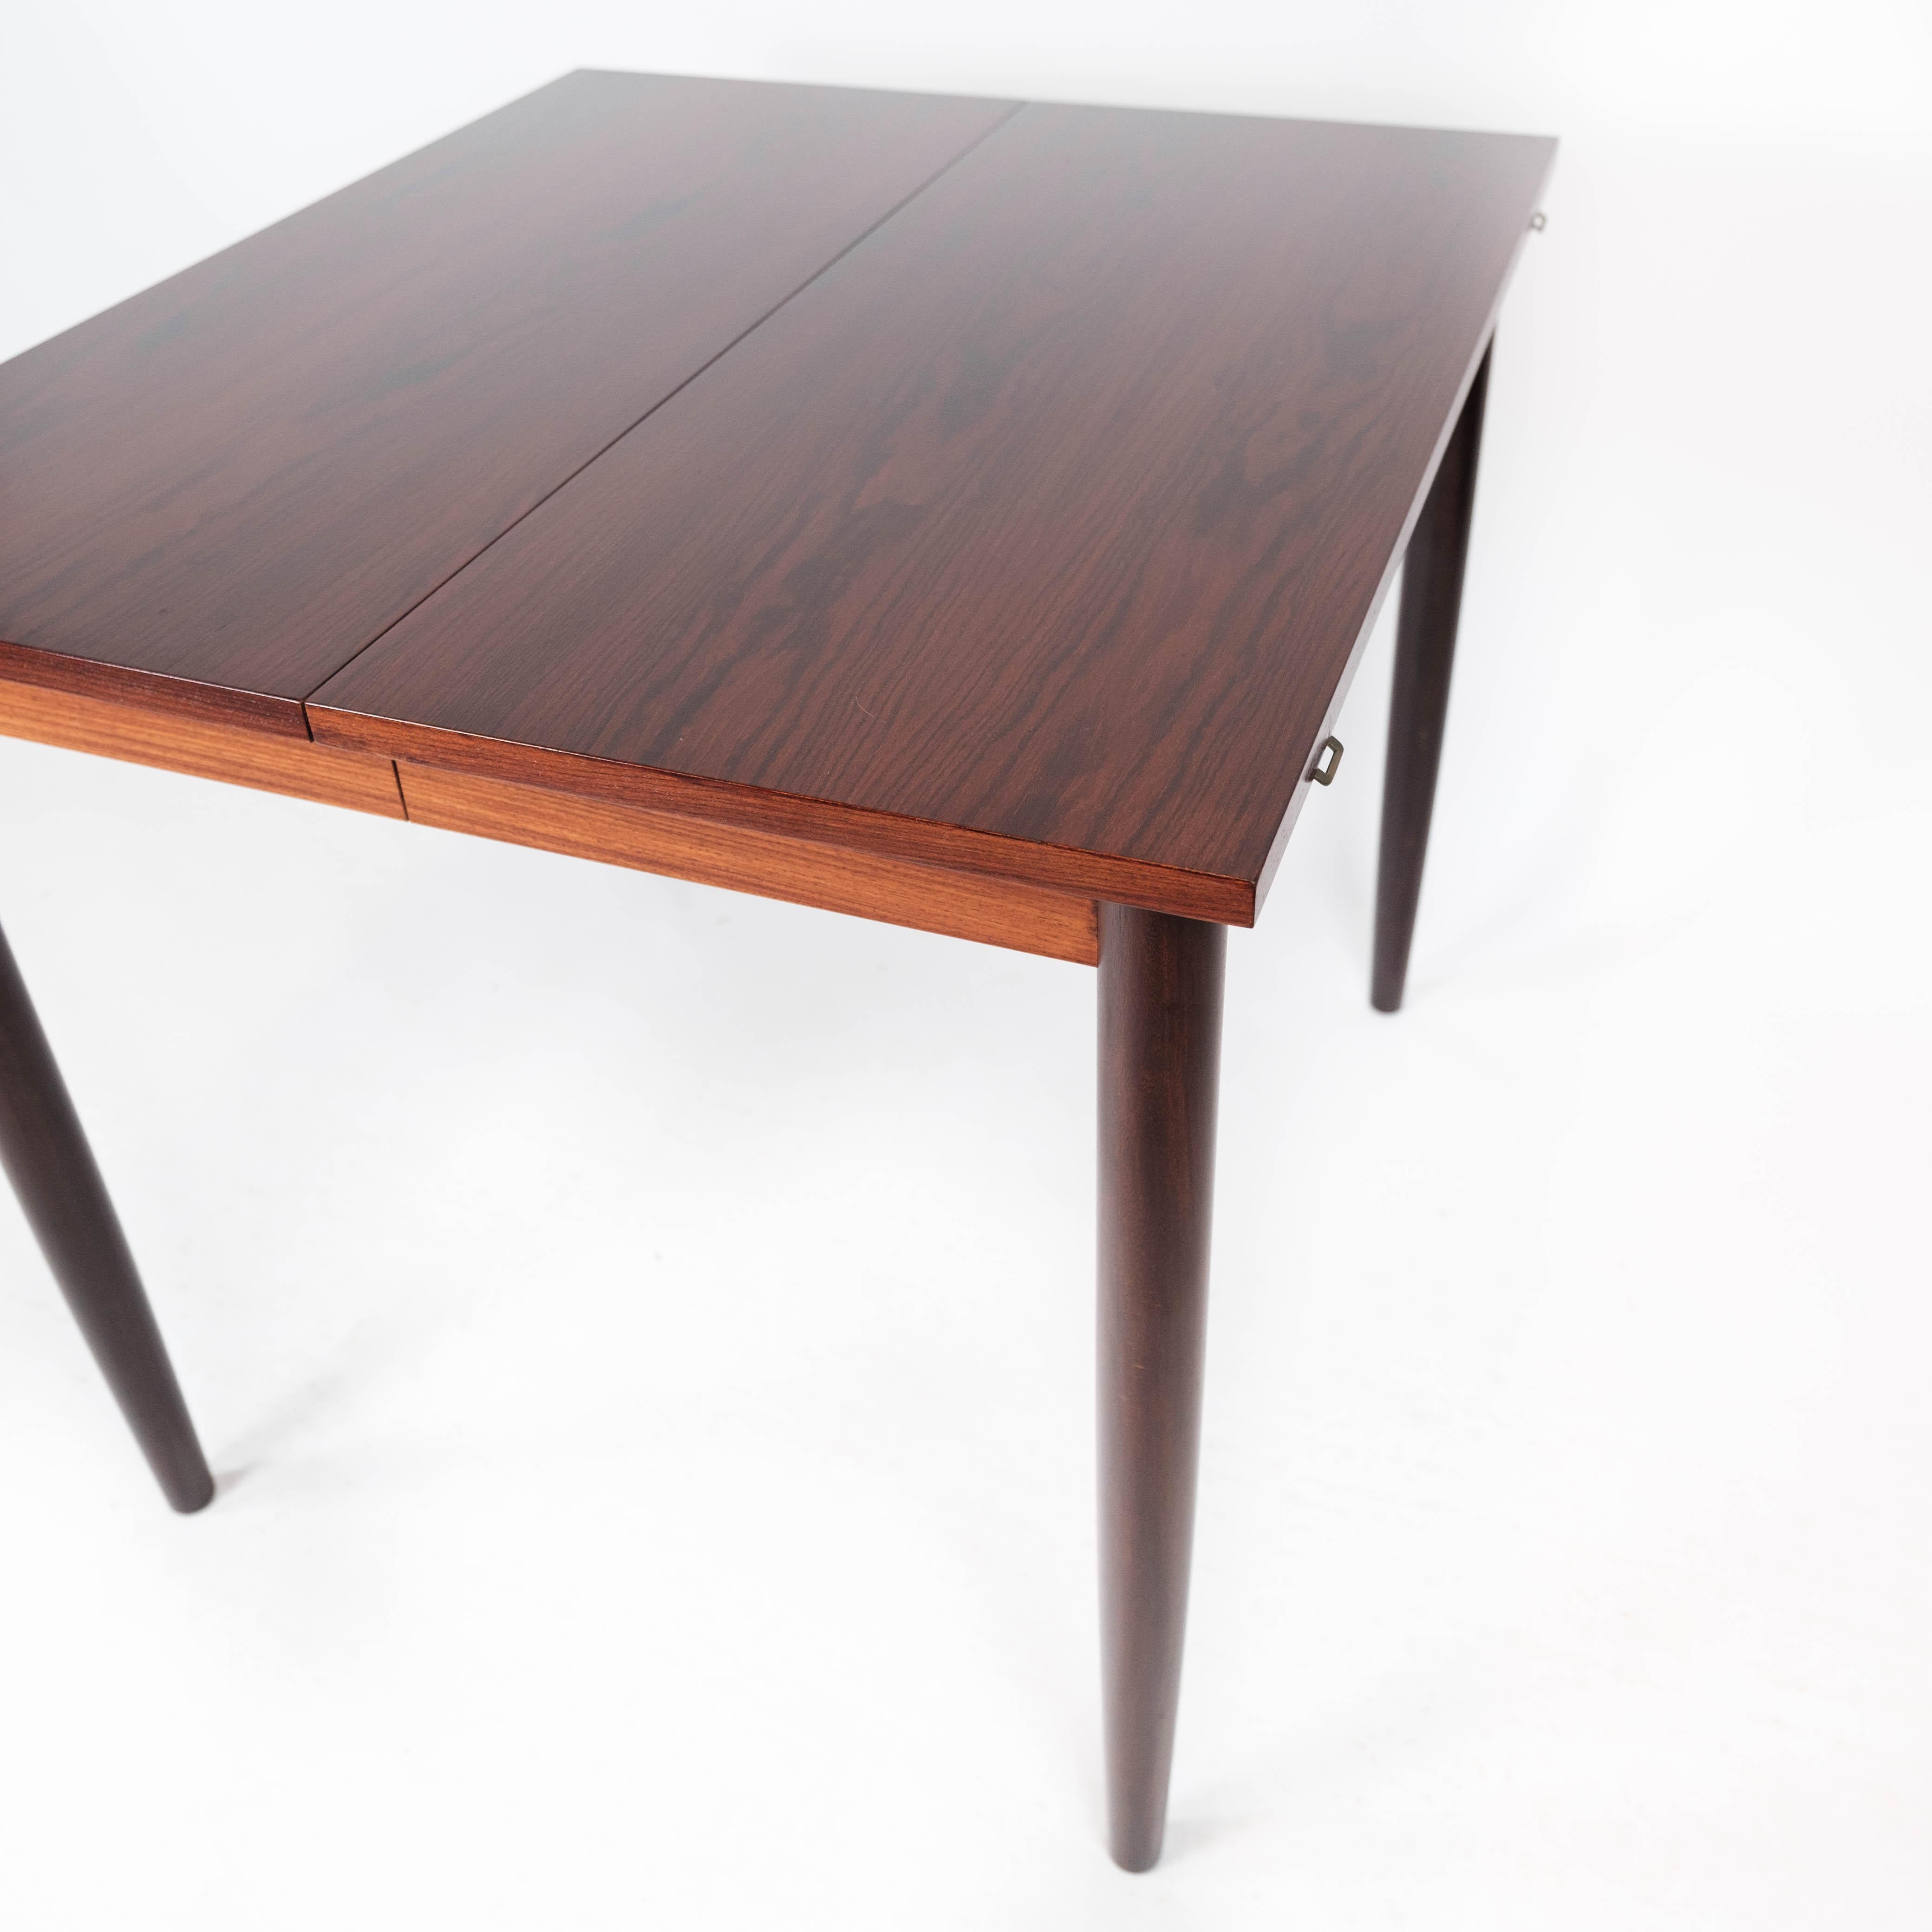 Danish Dining Table Made In Rosewood With Extension Plates By Arne Vodder From 1960s For Sale